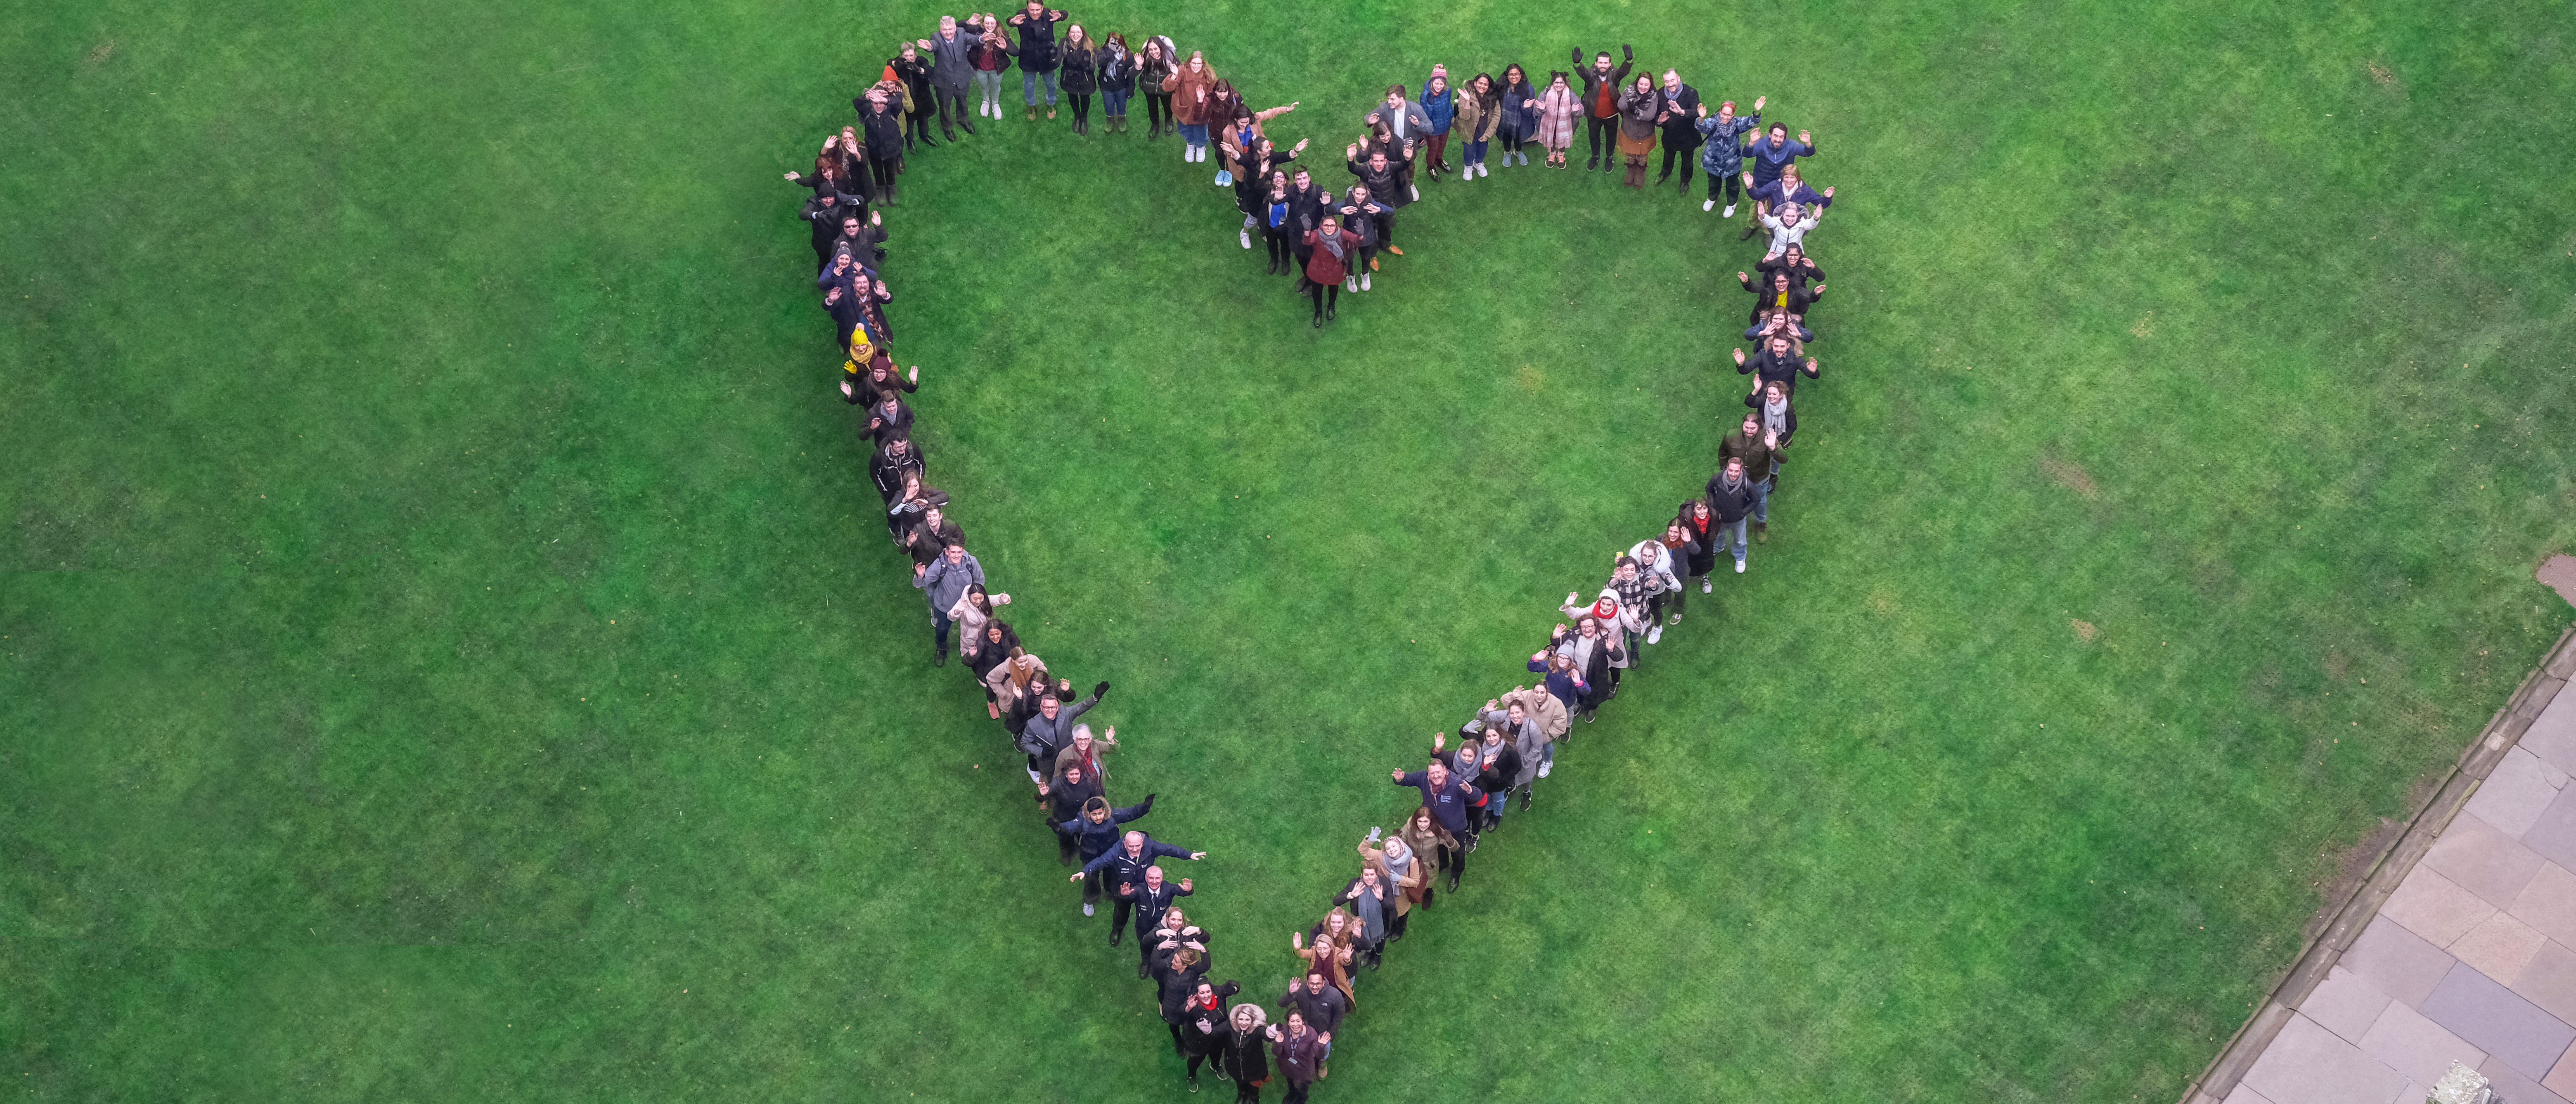 Heart made up of people standing in quad